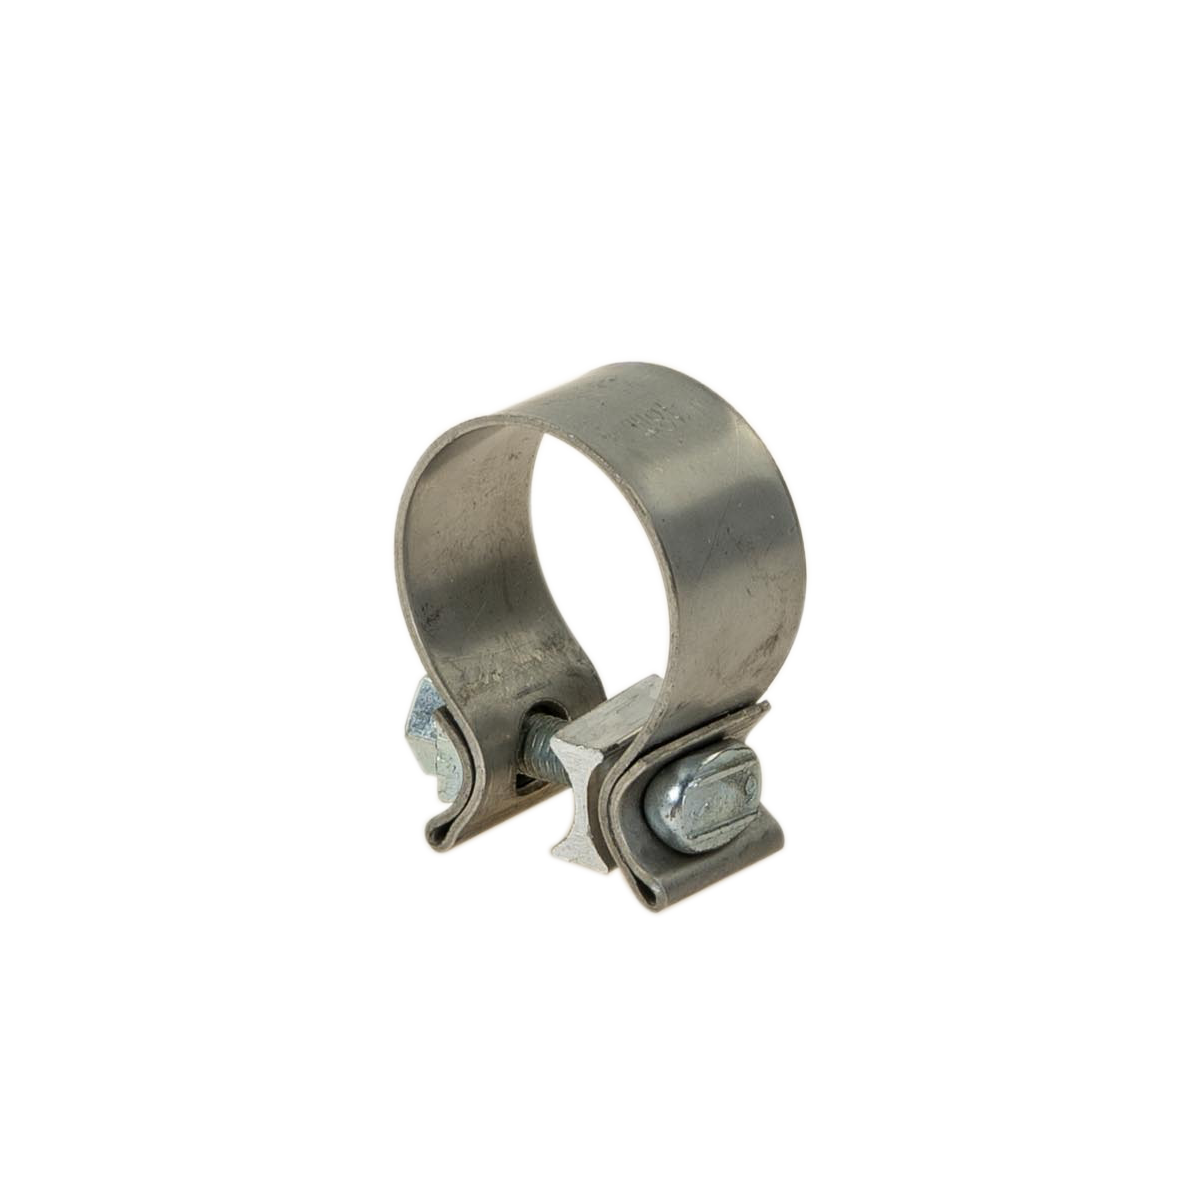 Reinforced exhaust clamp